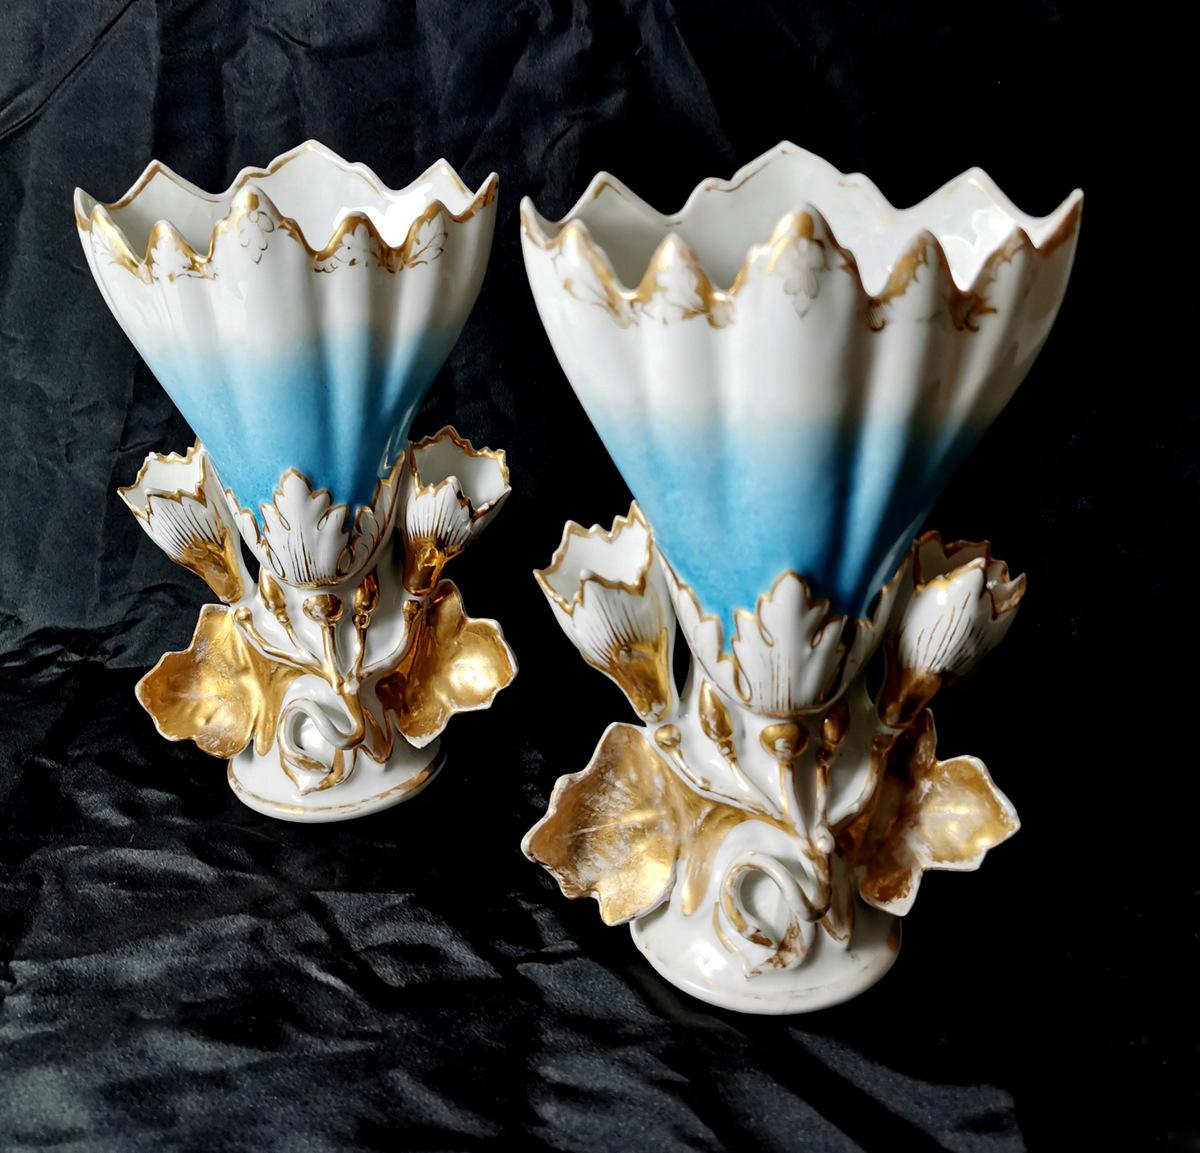 We kindly suggest you read the whole description, because with it we try to give you detailed technical and historical information to guarantee the authenticity of our objects.
Romantic bridal vases have the classic funnel shape, flower and leaf